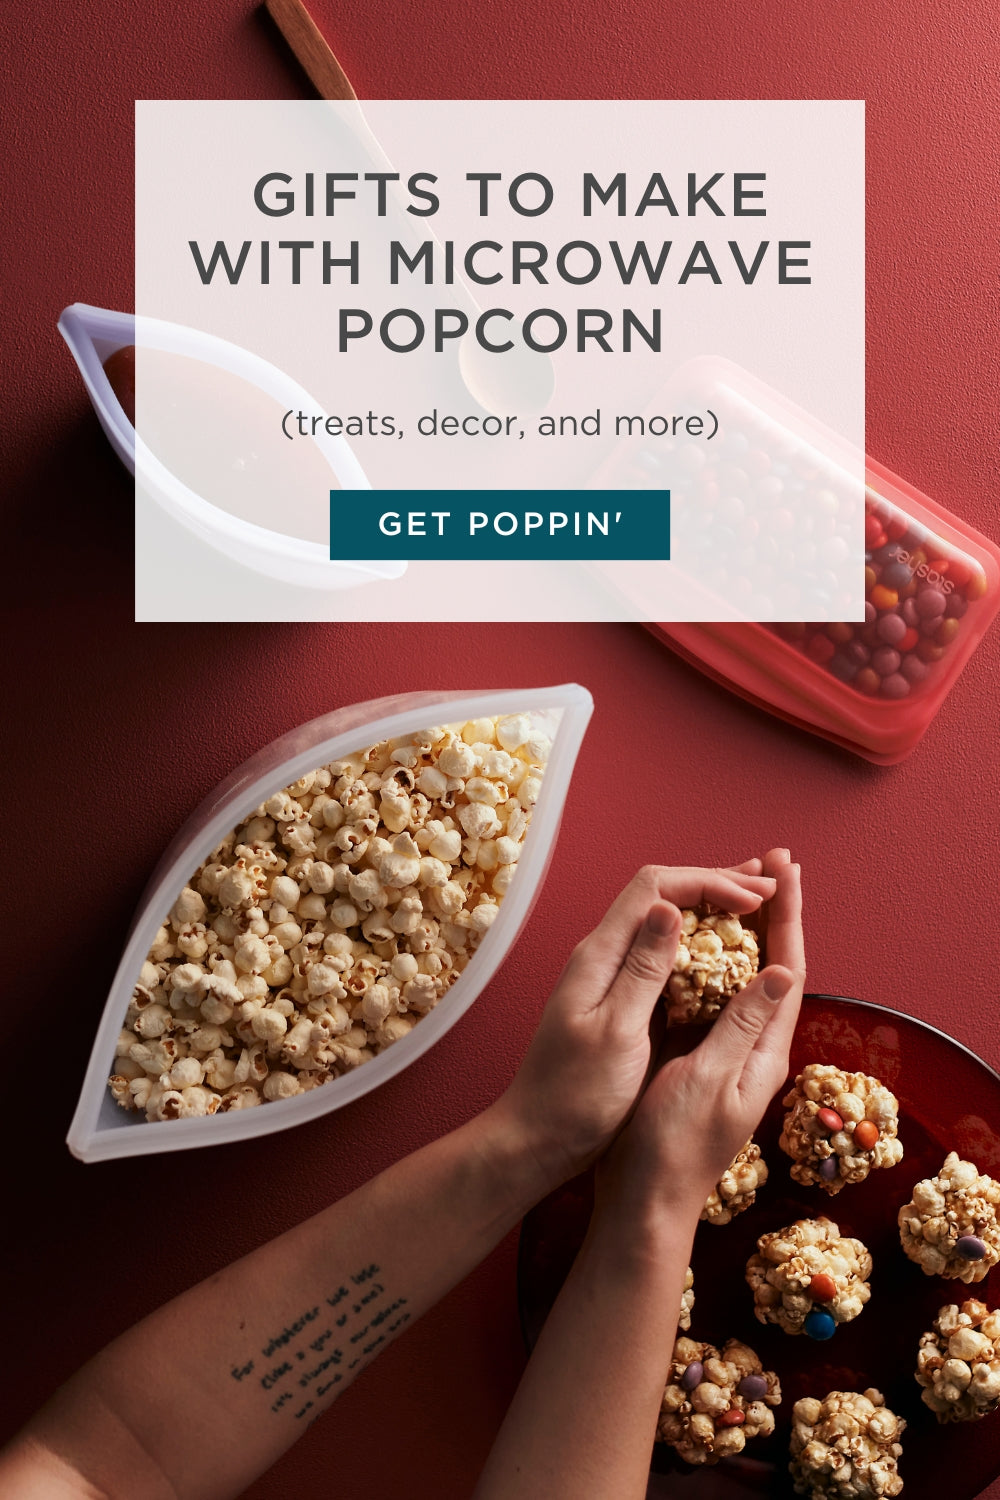 Gifts to Make with Popcorn